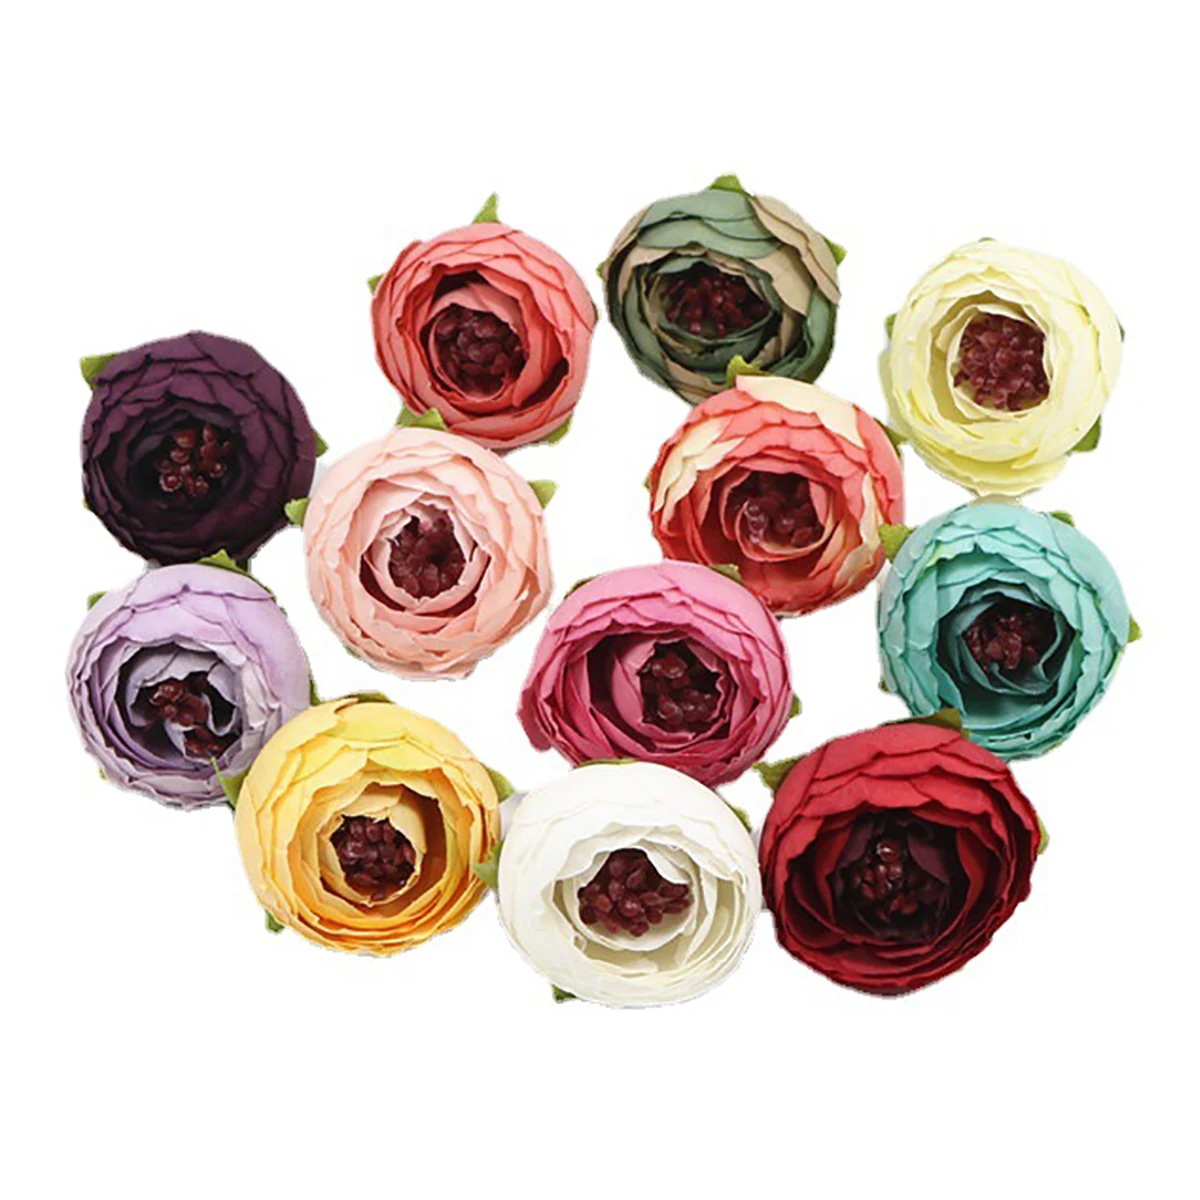 

10Pcs Birthday Artificial Tea Rose Bud Small Peony Camellia Flores Flower Head For Wedding Ball Decoration Party DIY Craft Gifts